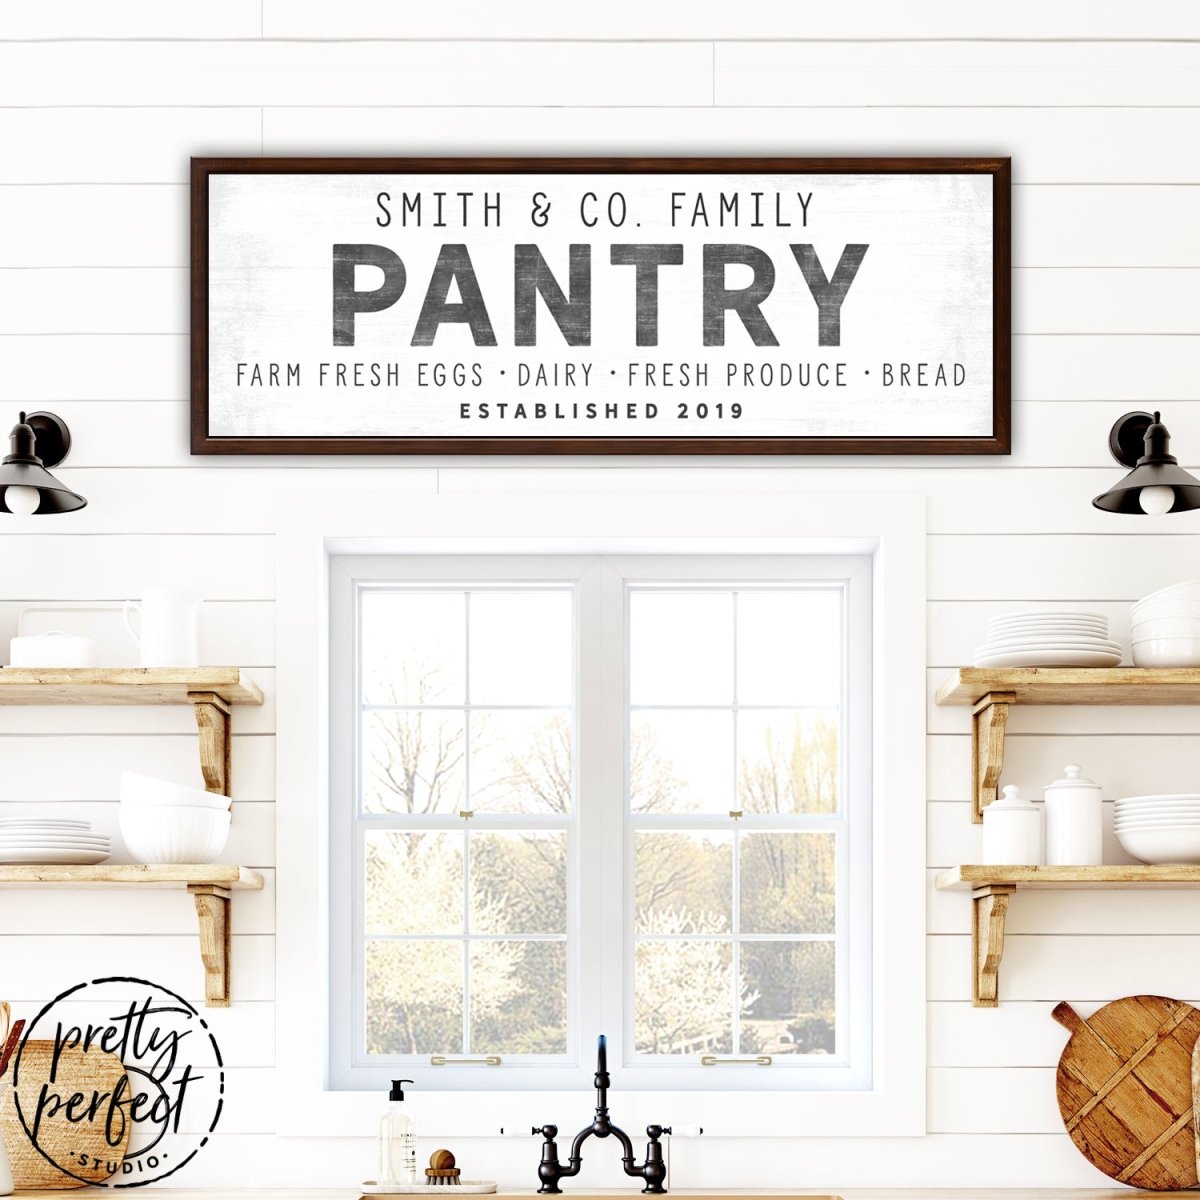 Personalized Pantry Sign With Name & Established Date Above Kitchen Sink - Pretty Perfect Studio